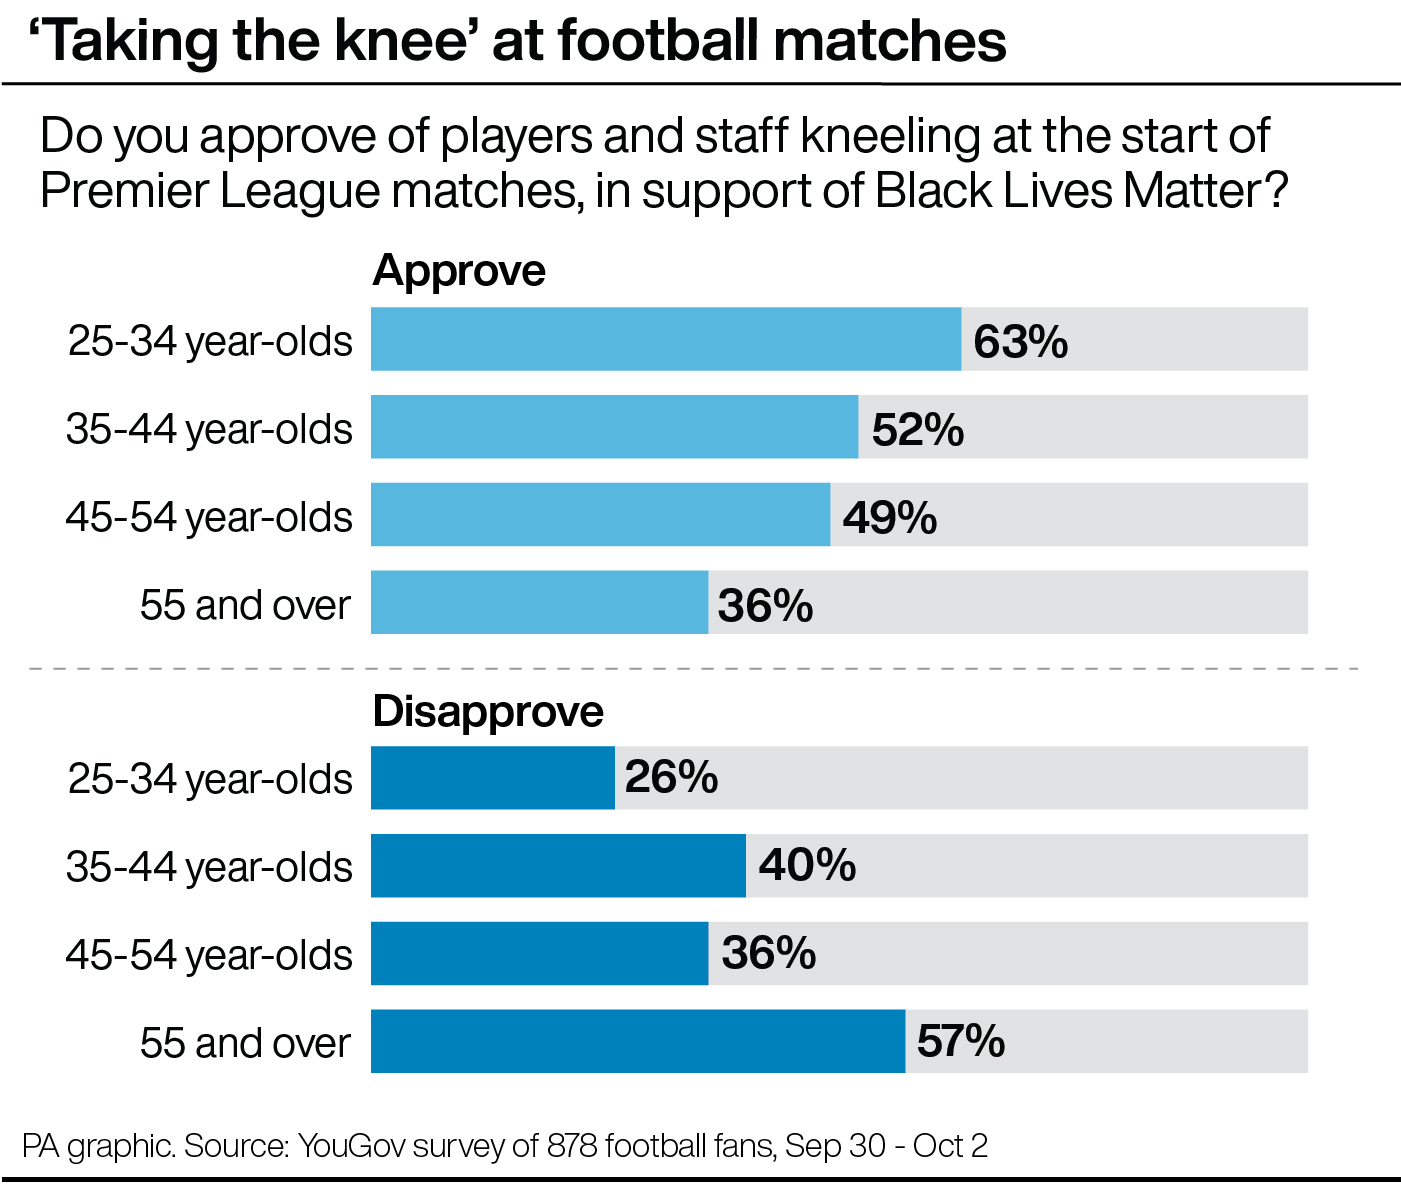 Approval levels by age group for players 'taking the knee'